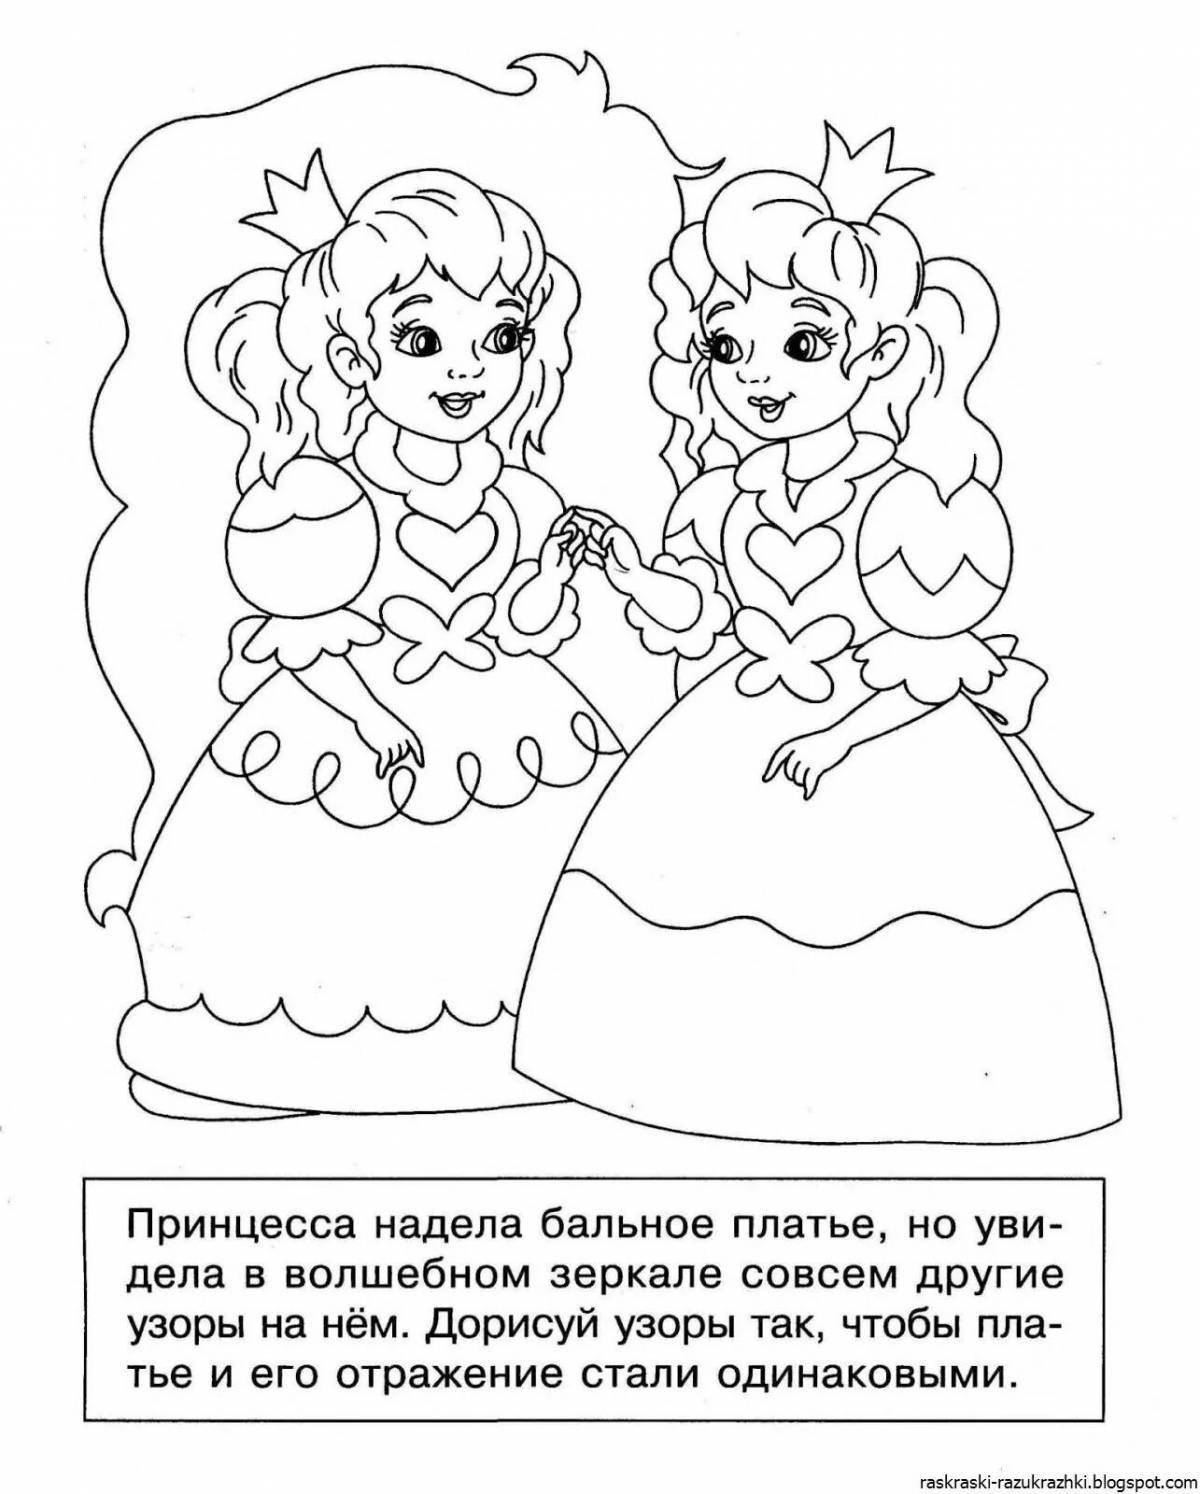 Creative coloring book for girls 5-6 years old